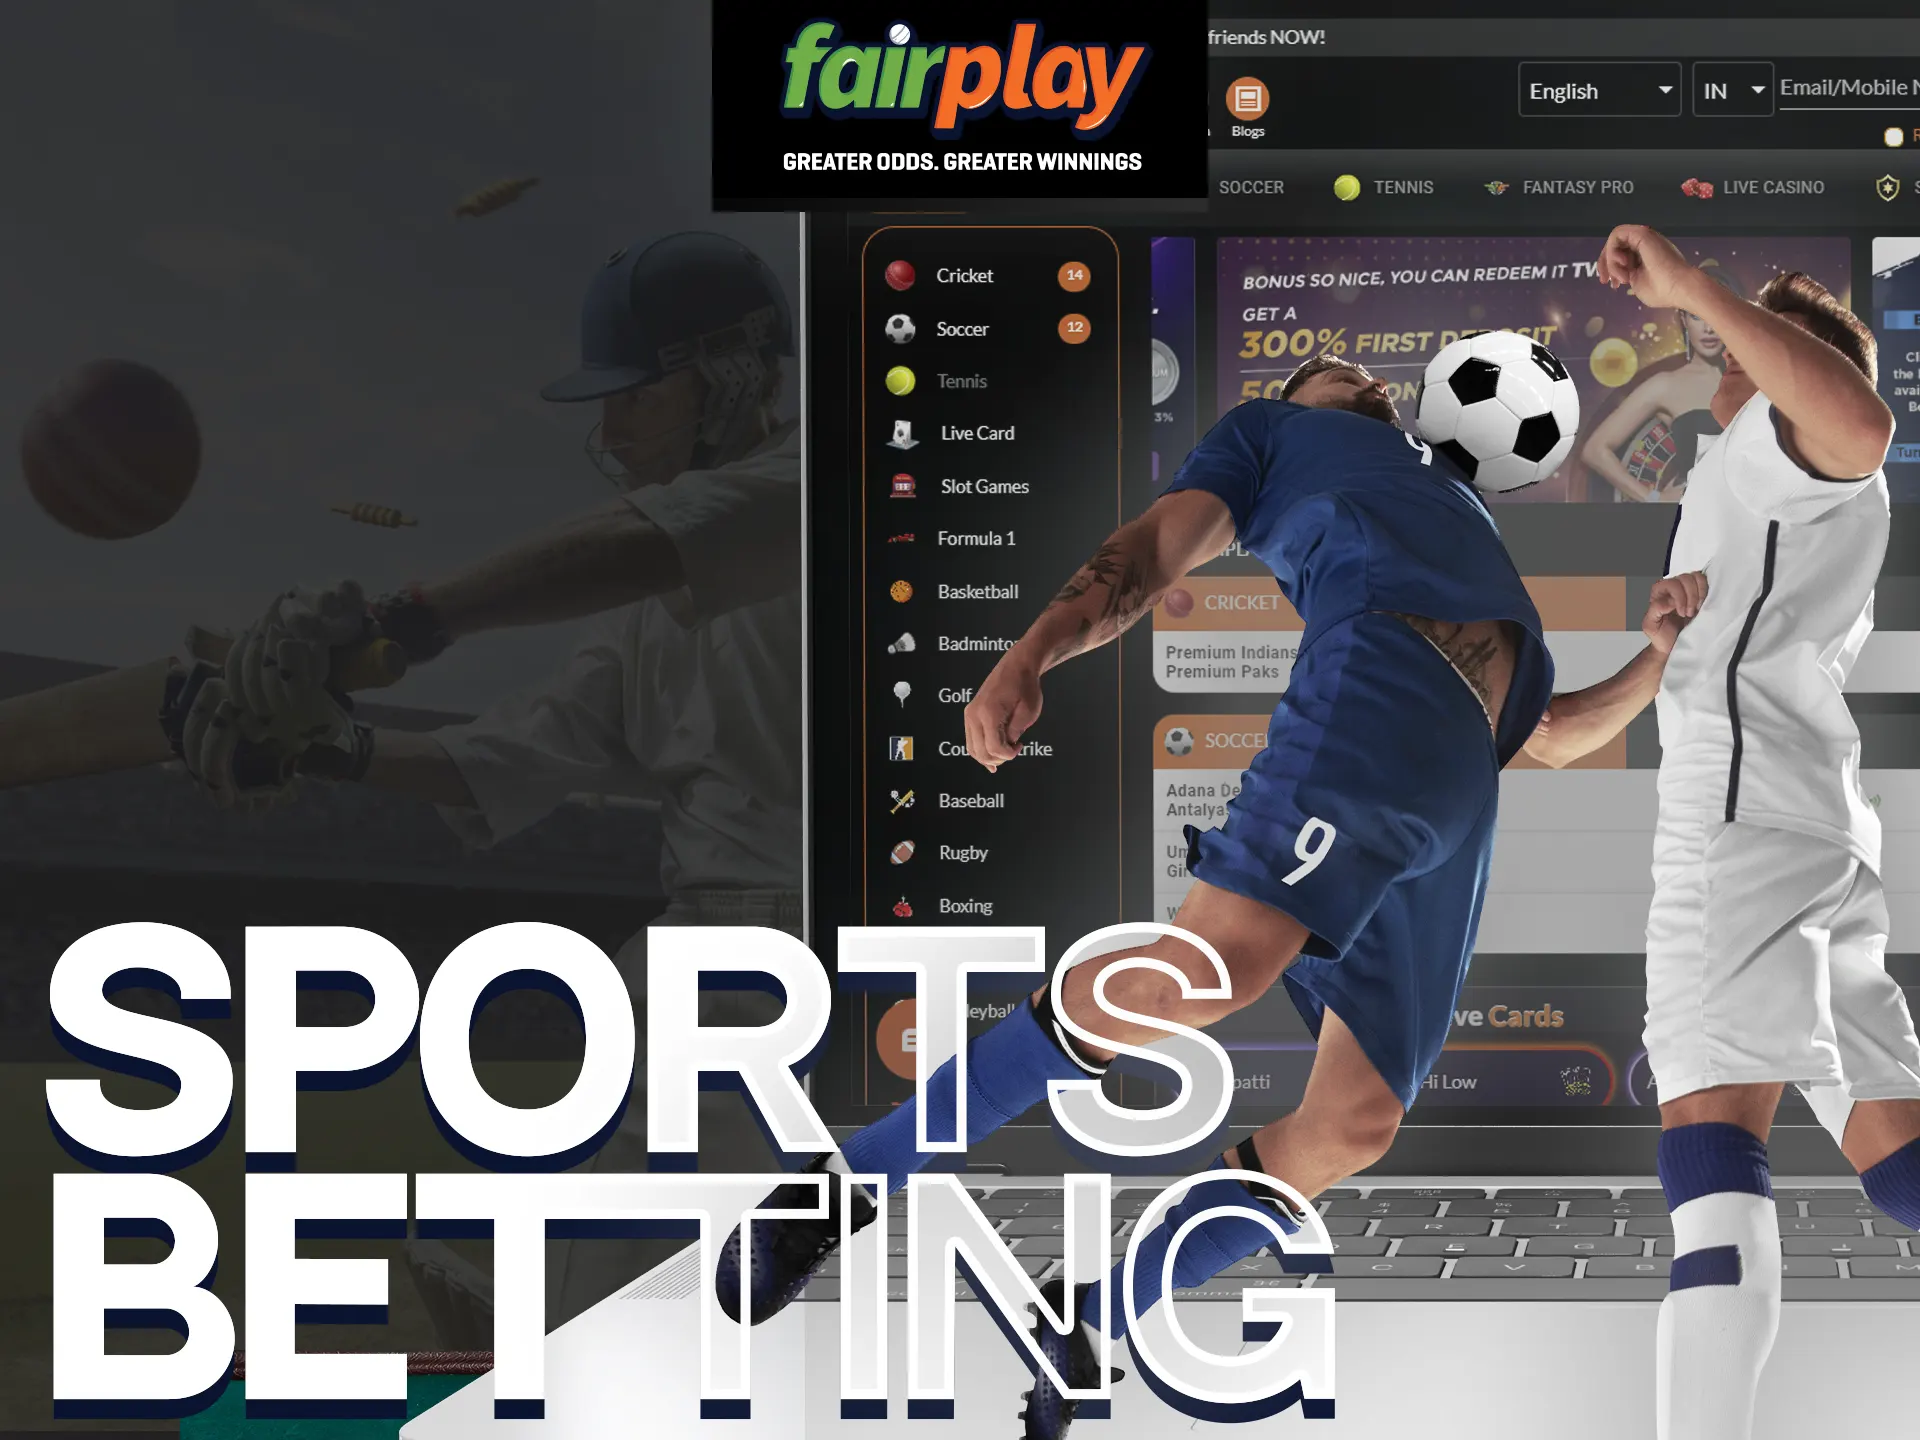 Fairplay offers a big diversity of the sports betting options.